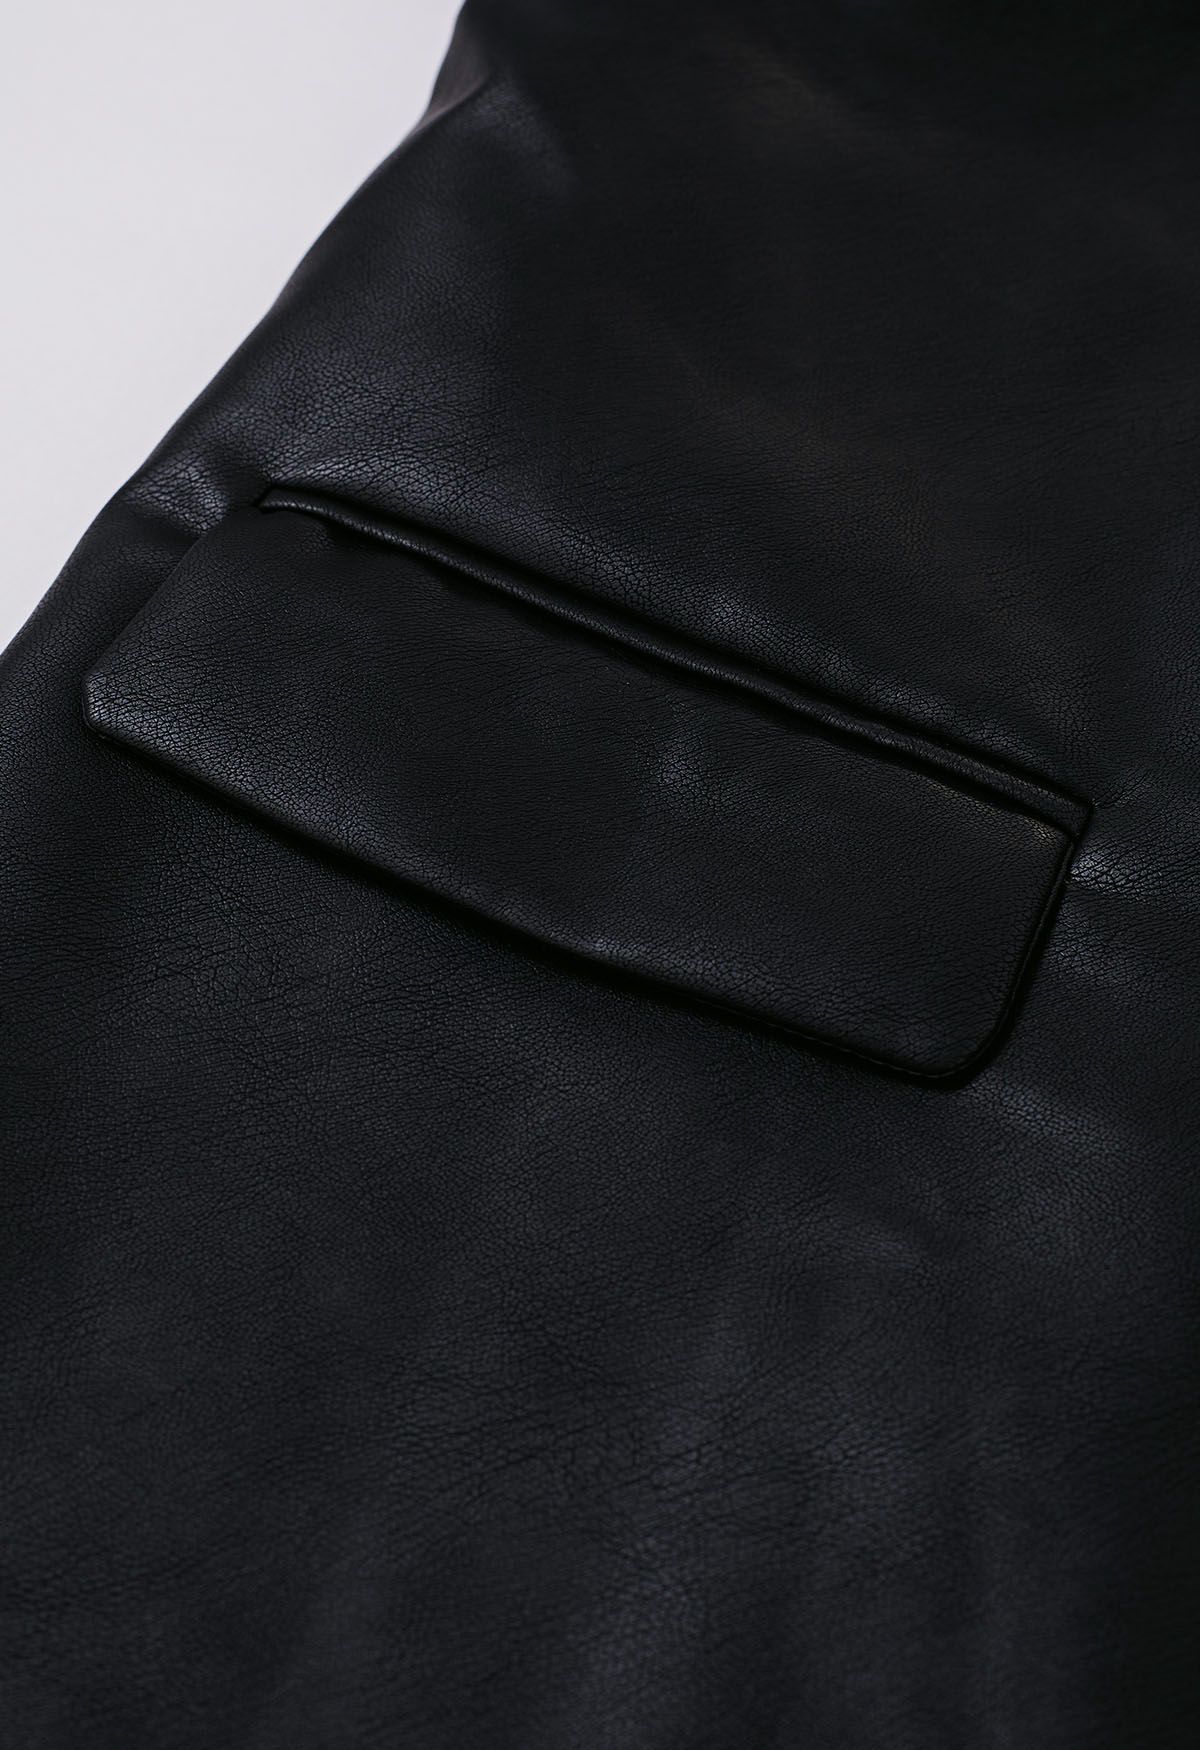 Simplicity Collarless Faux Leather Jacket in Black